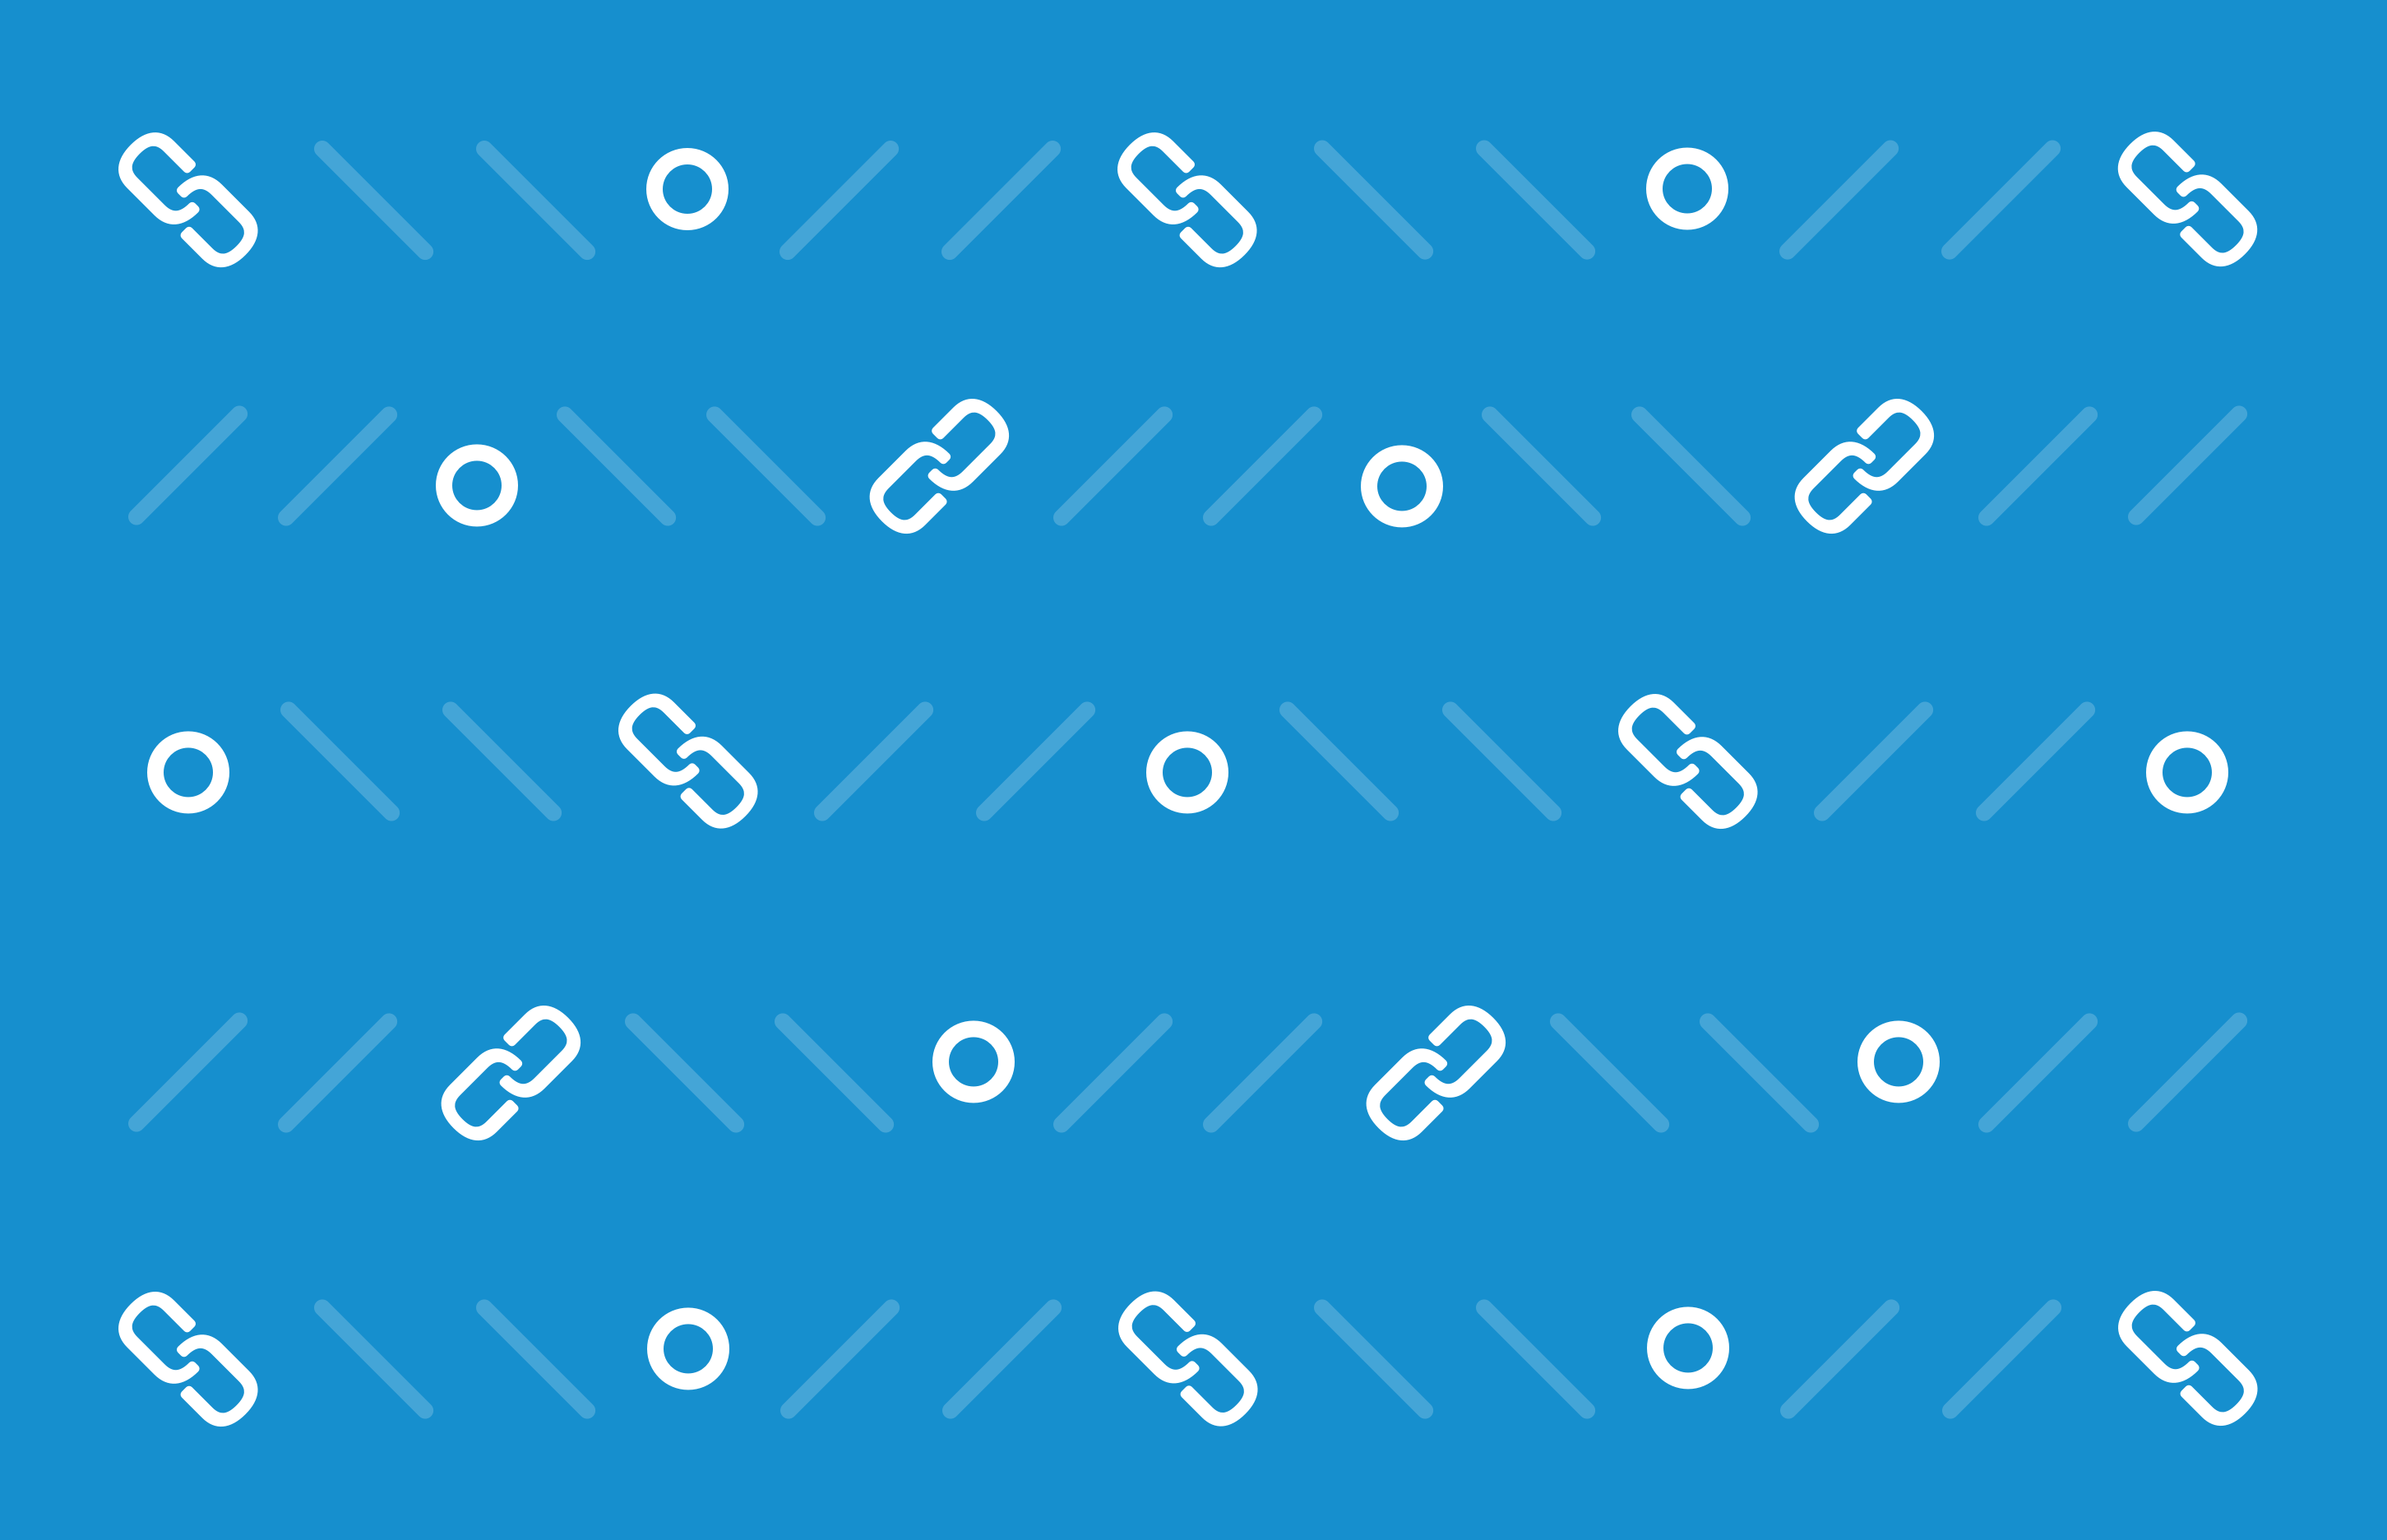 A pattern of link illustrations on a blue background